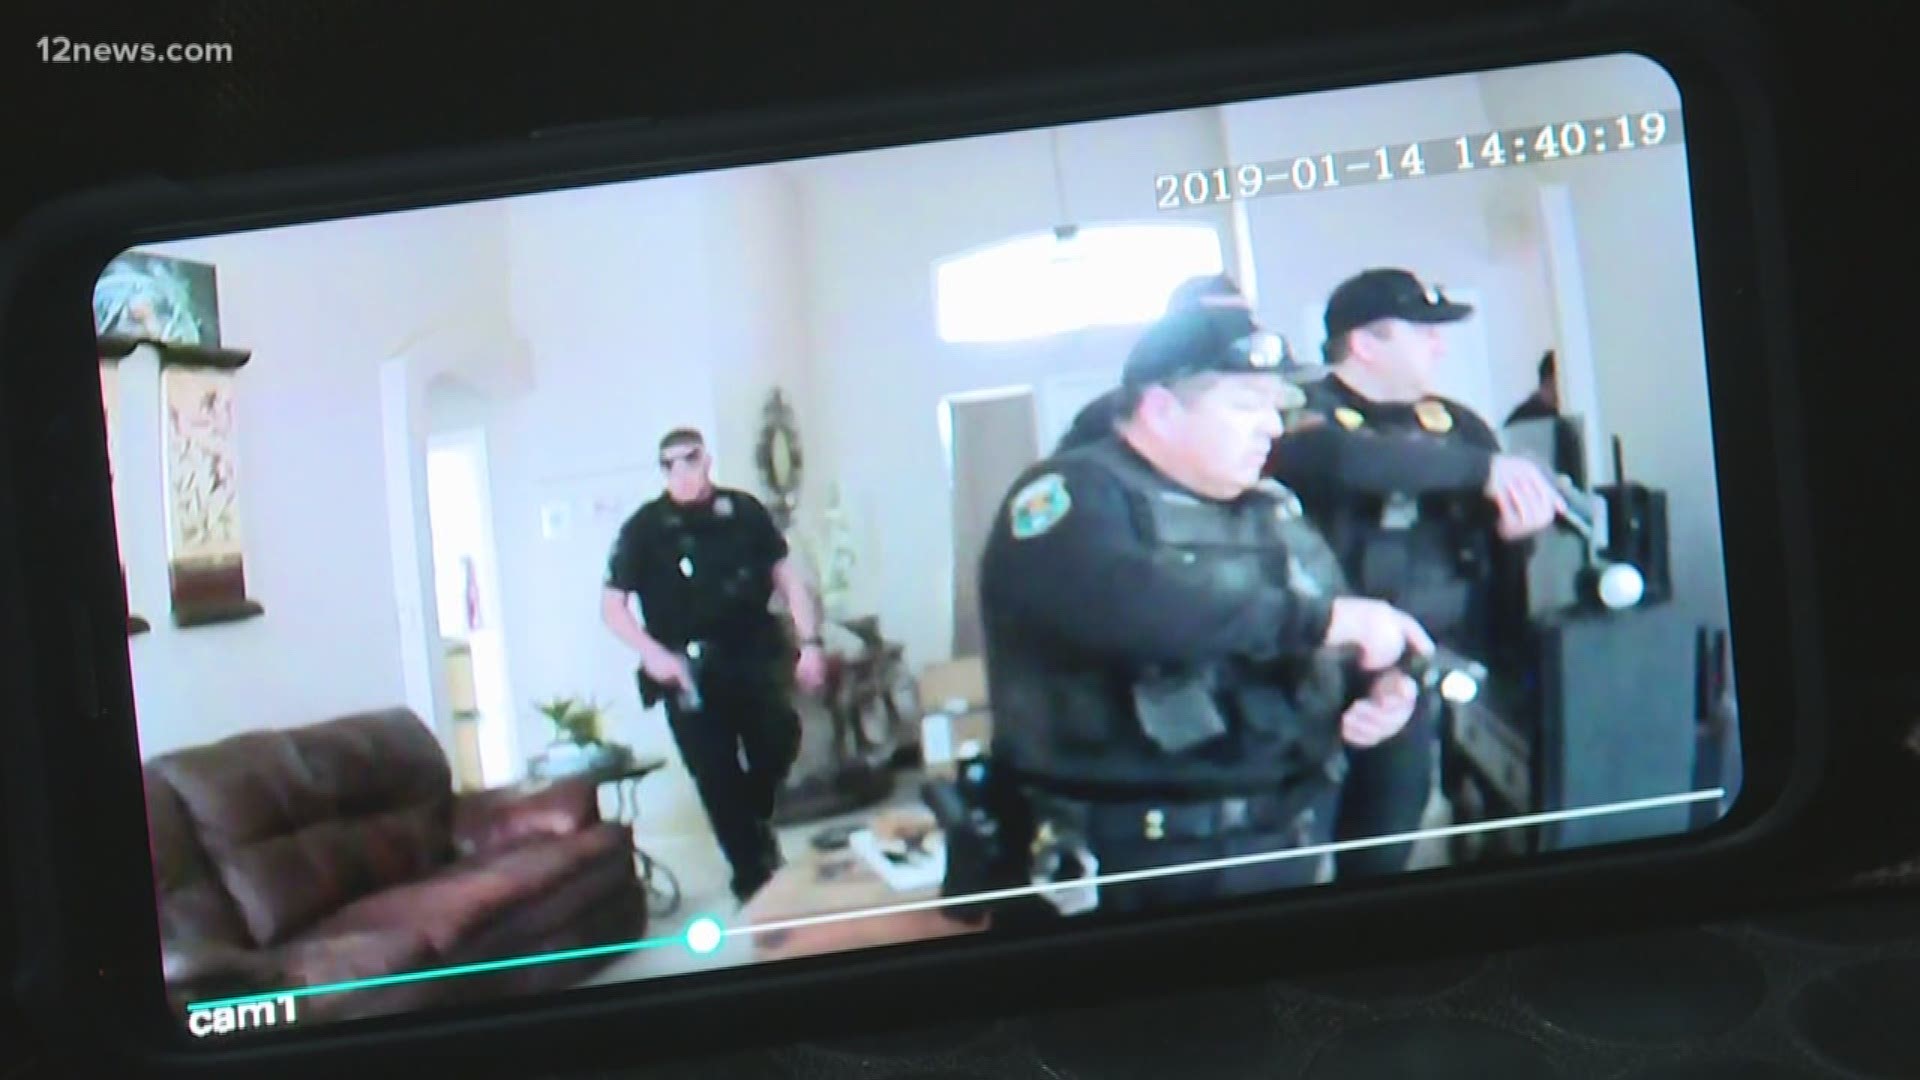 Police swarmed a Glendale man's home while he was streaming live on YouTube due to a prank call. The man plans to reach out to city leaders for better vetting of calls.